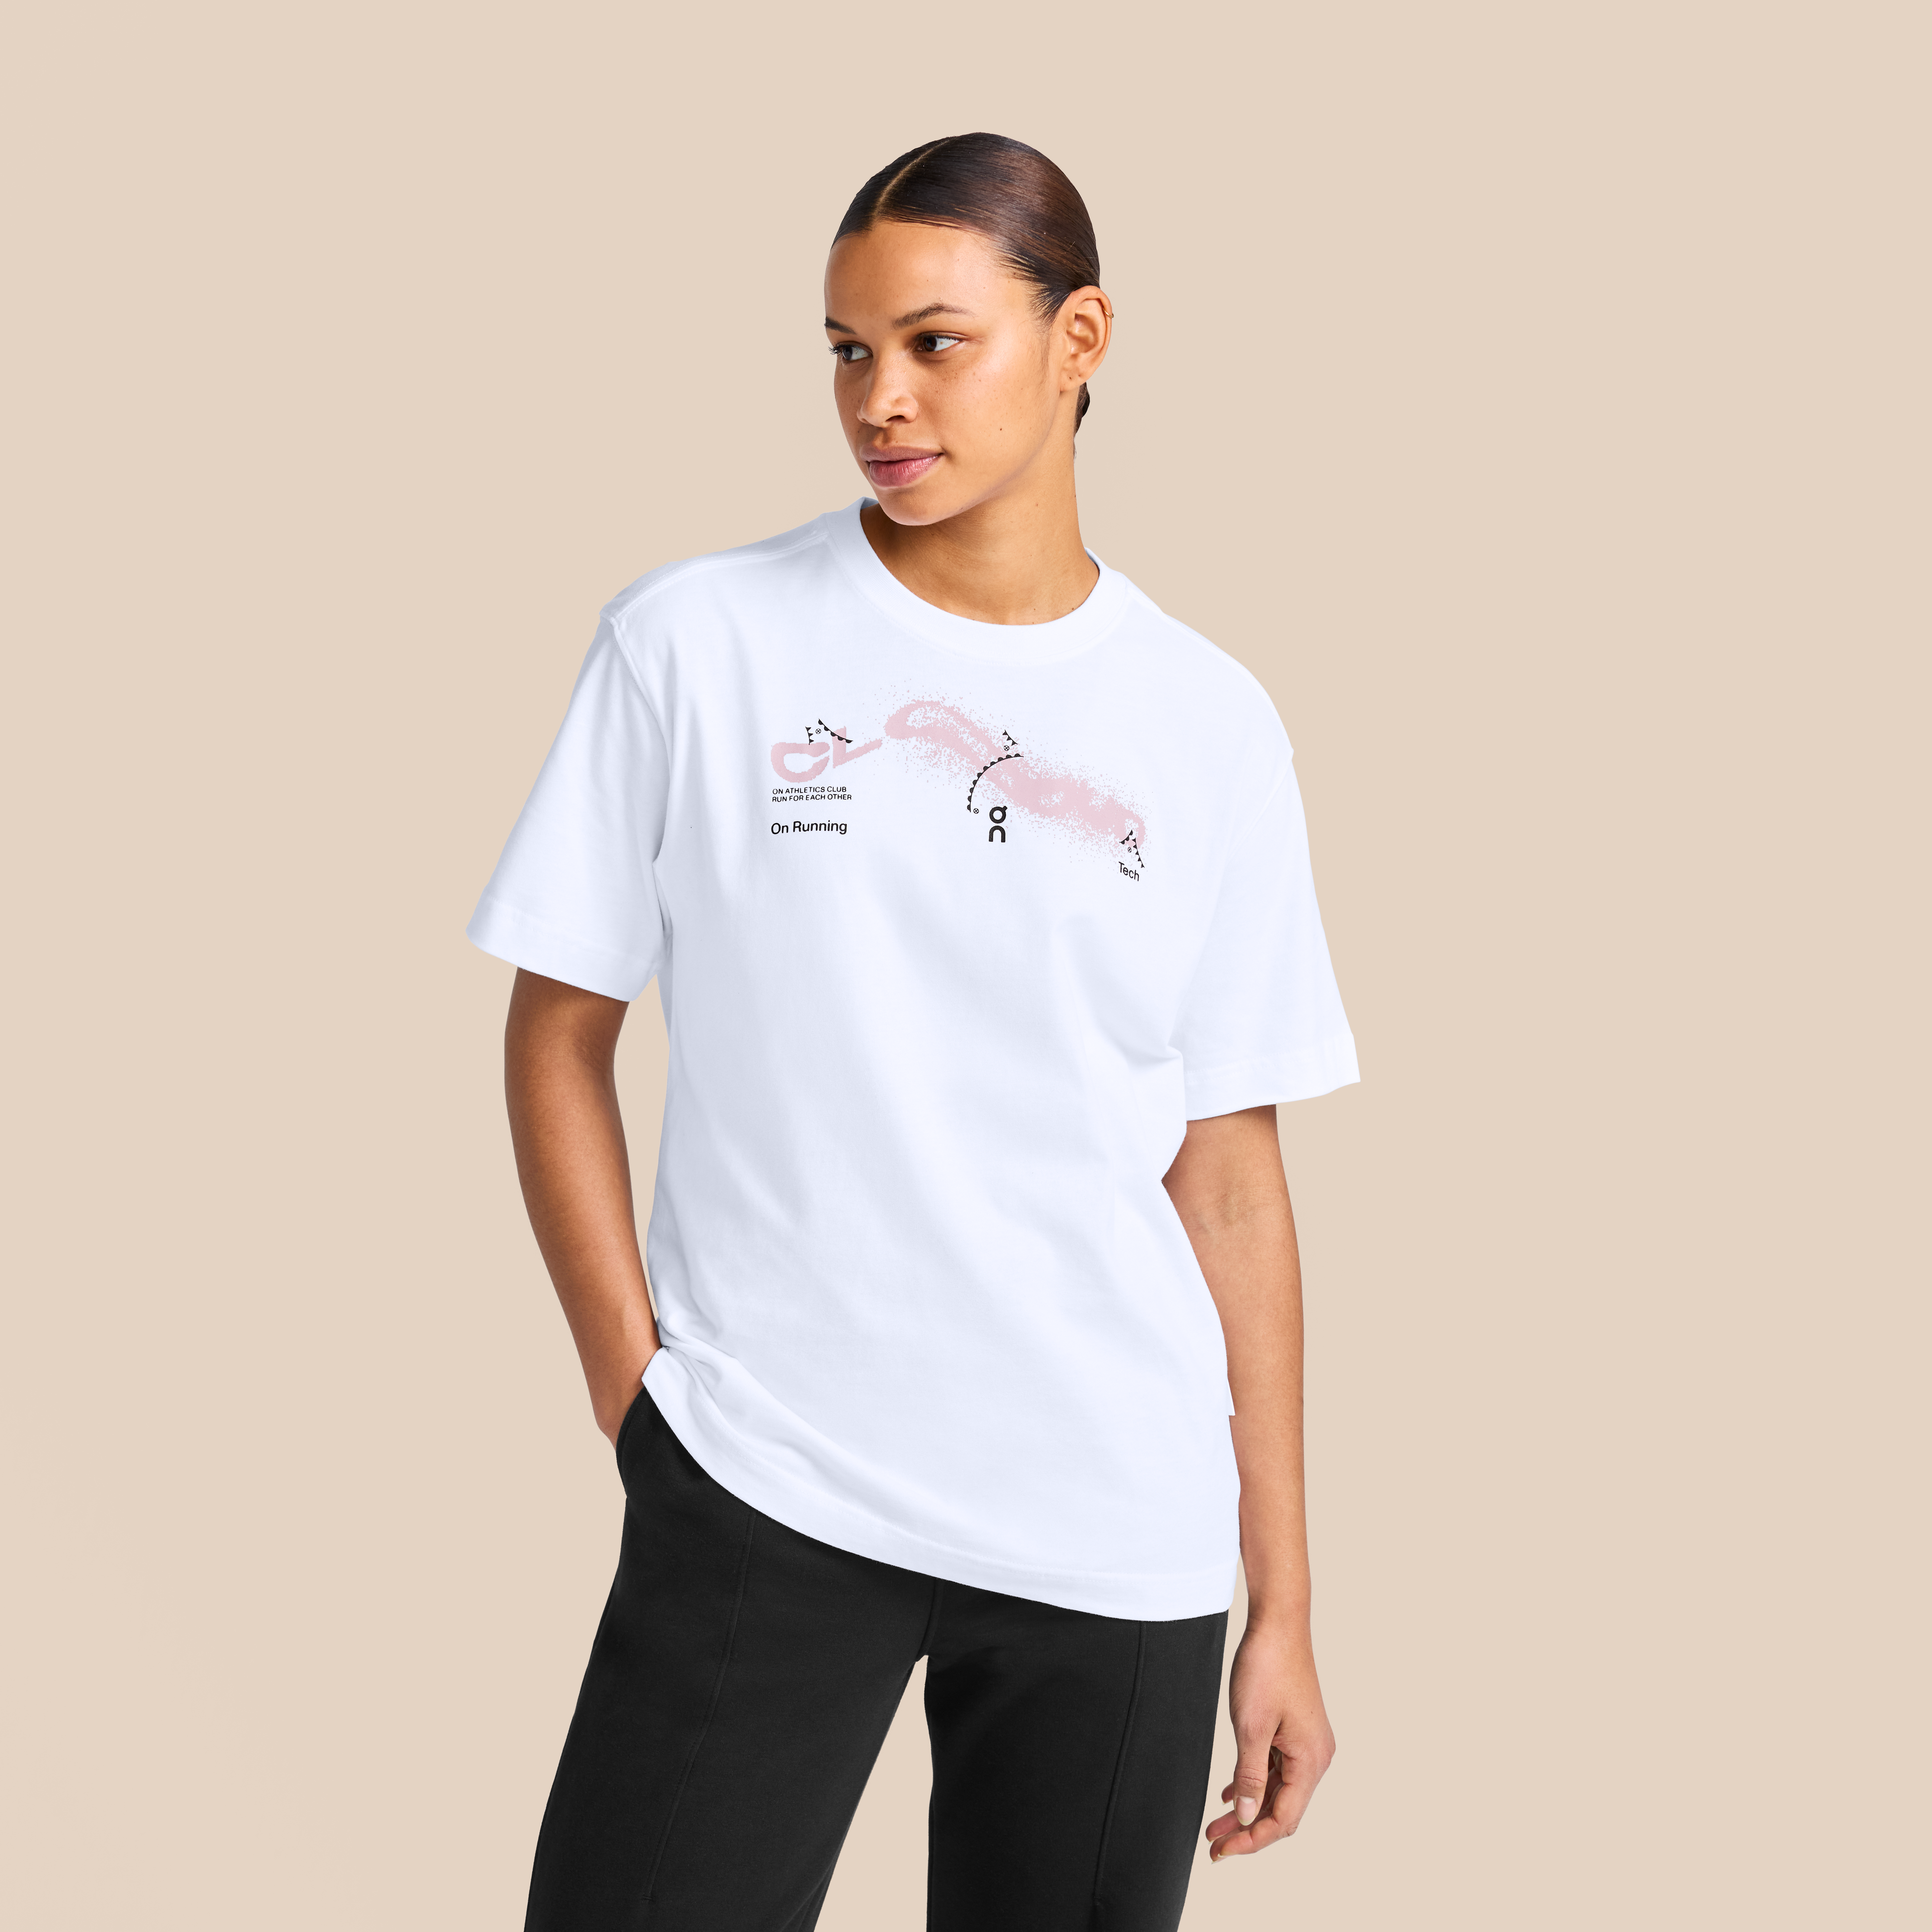 On Club-T Cloud White Women All-day wear, recovery, graphics Tops and t-shirts